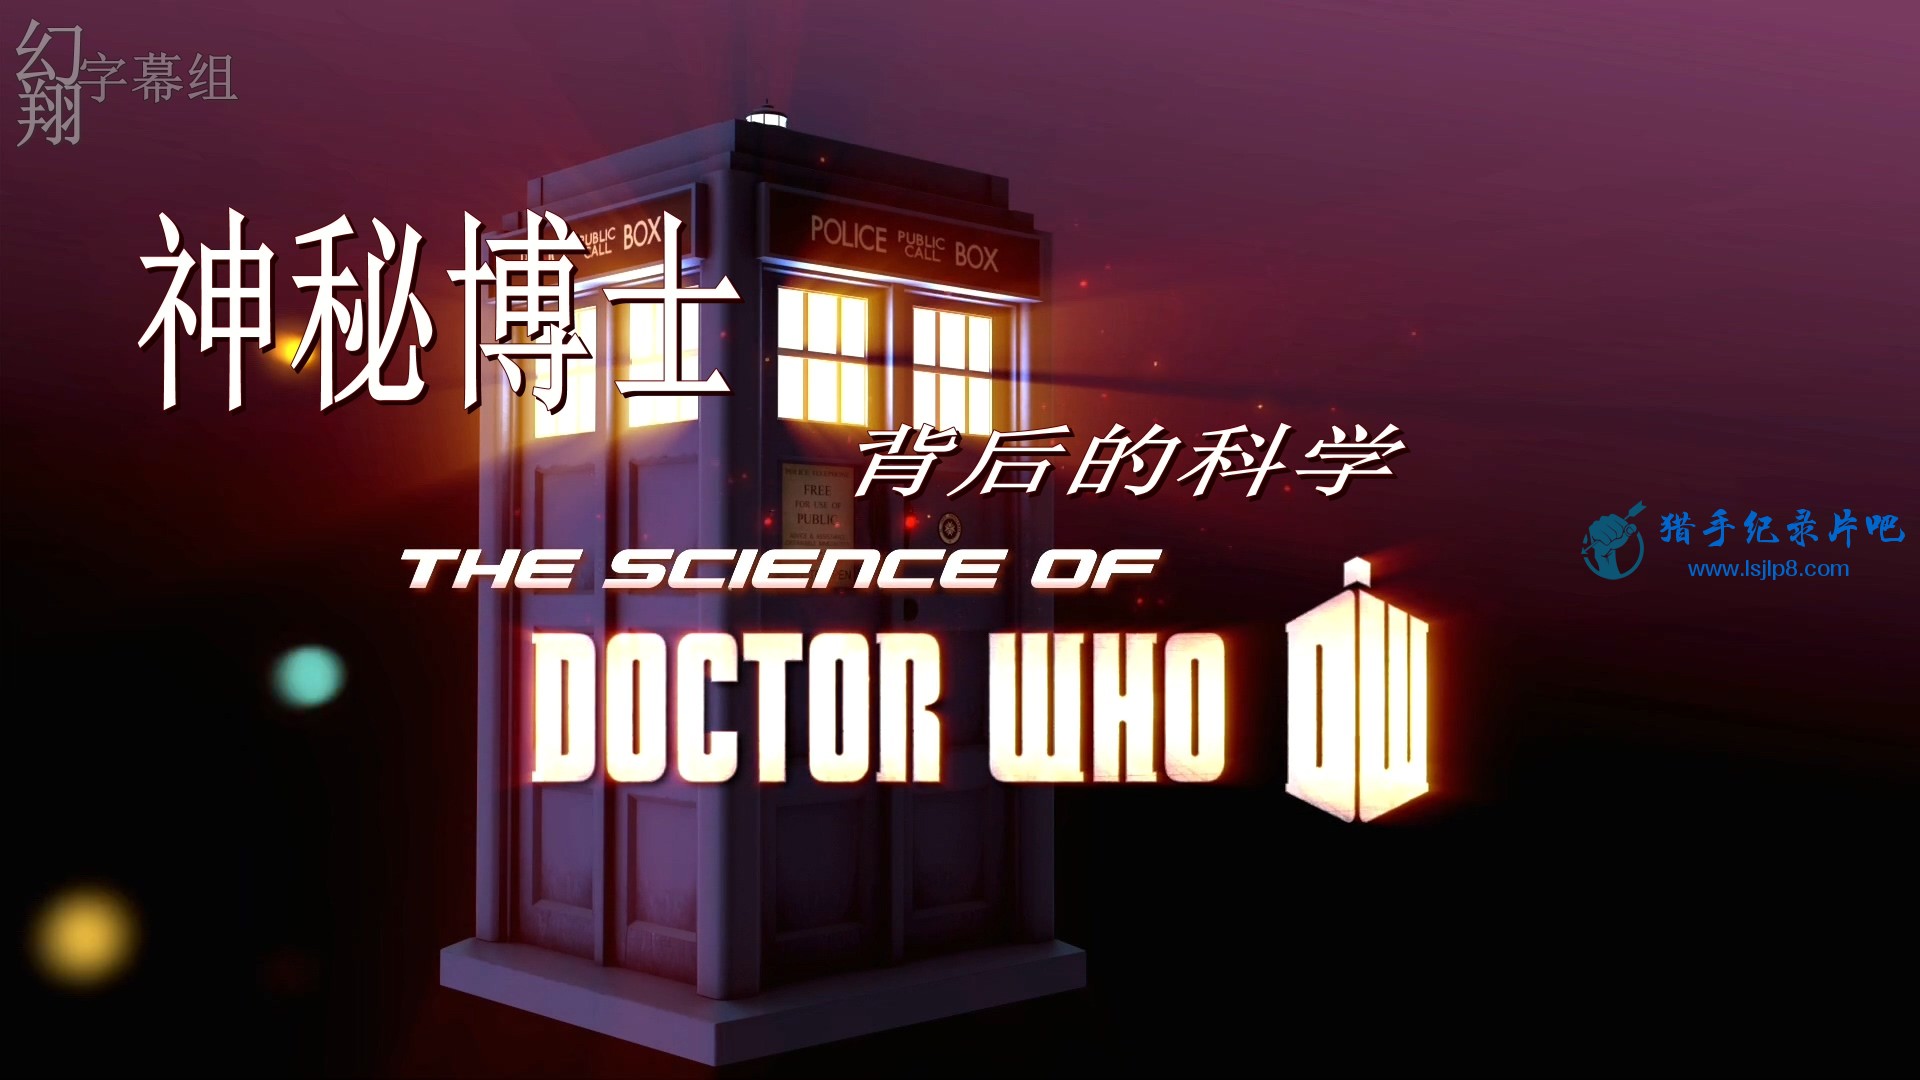 BBC.The.Science.of.Doctor.Who.1080p.HDTV.x264.AAC.MVGroup.org.mkv_20200213_135514.120.jpg